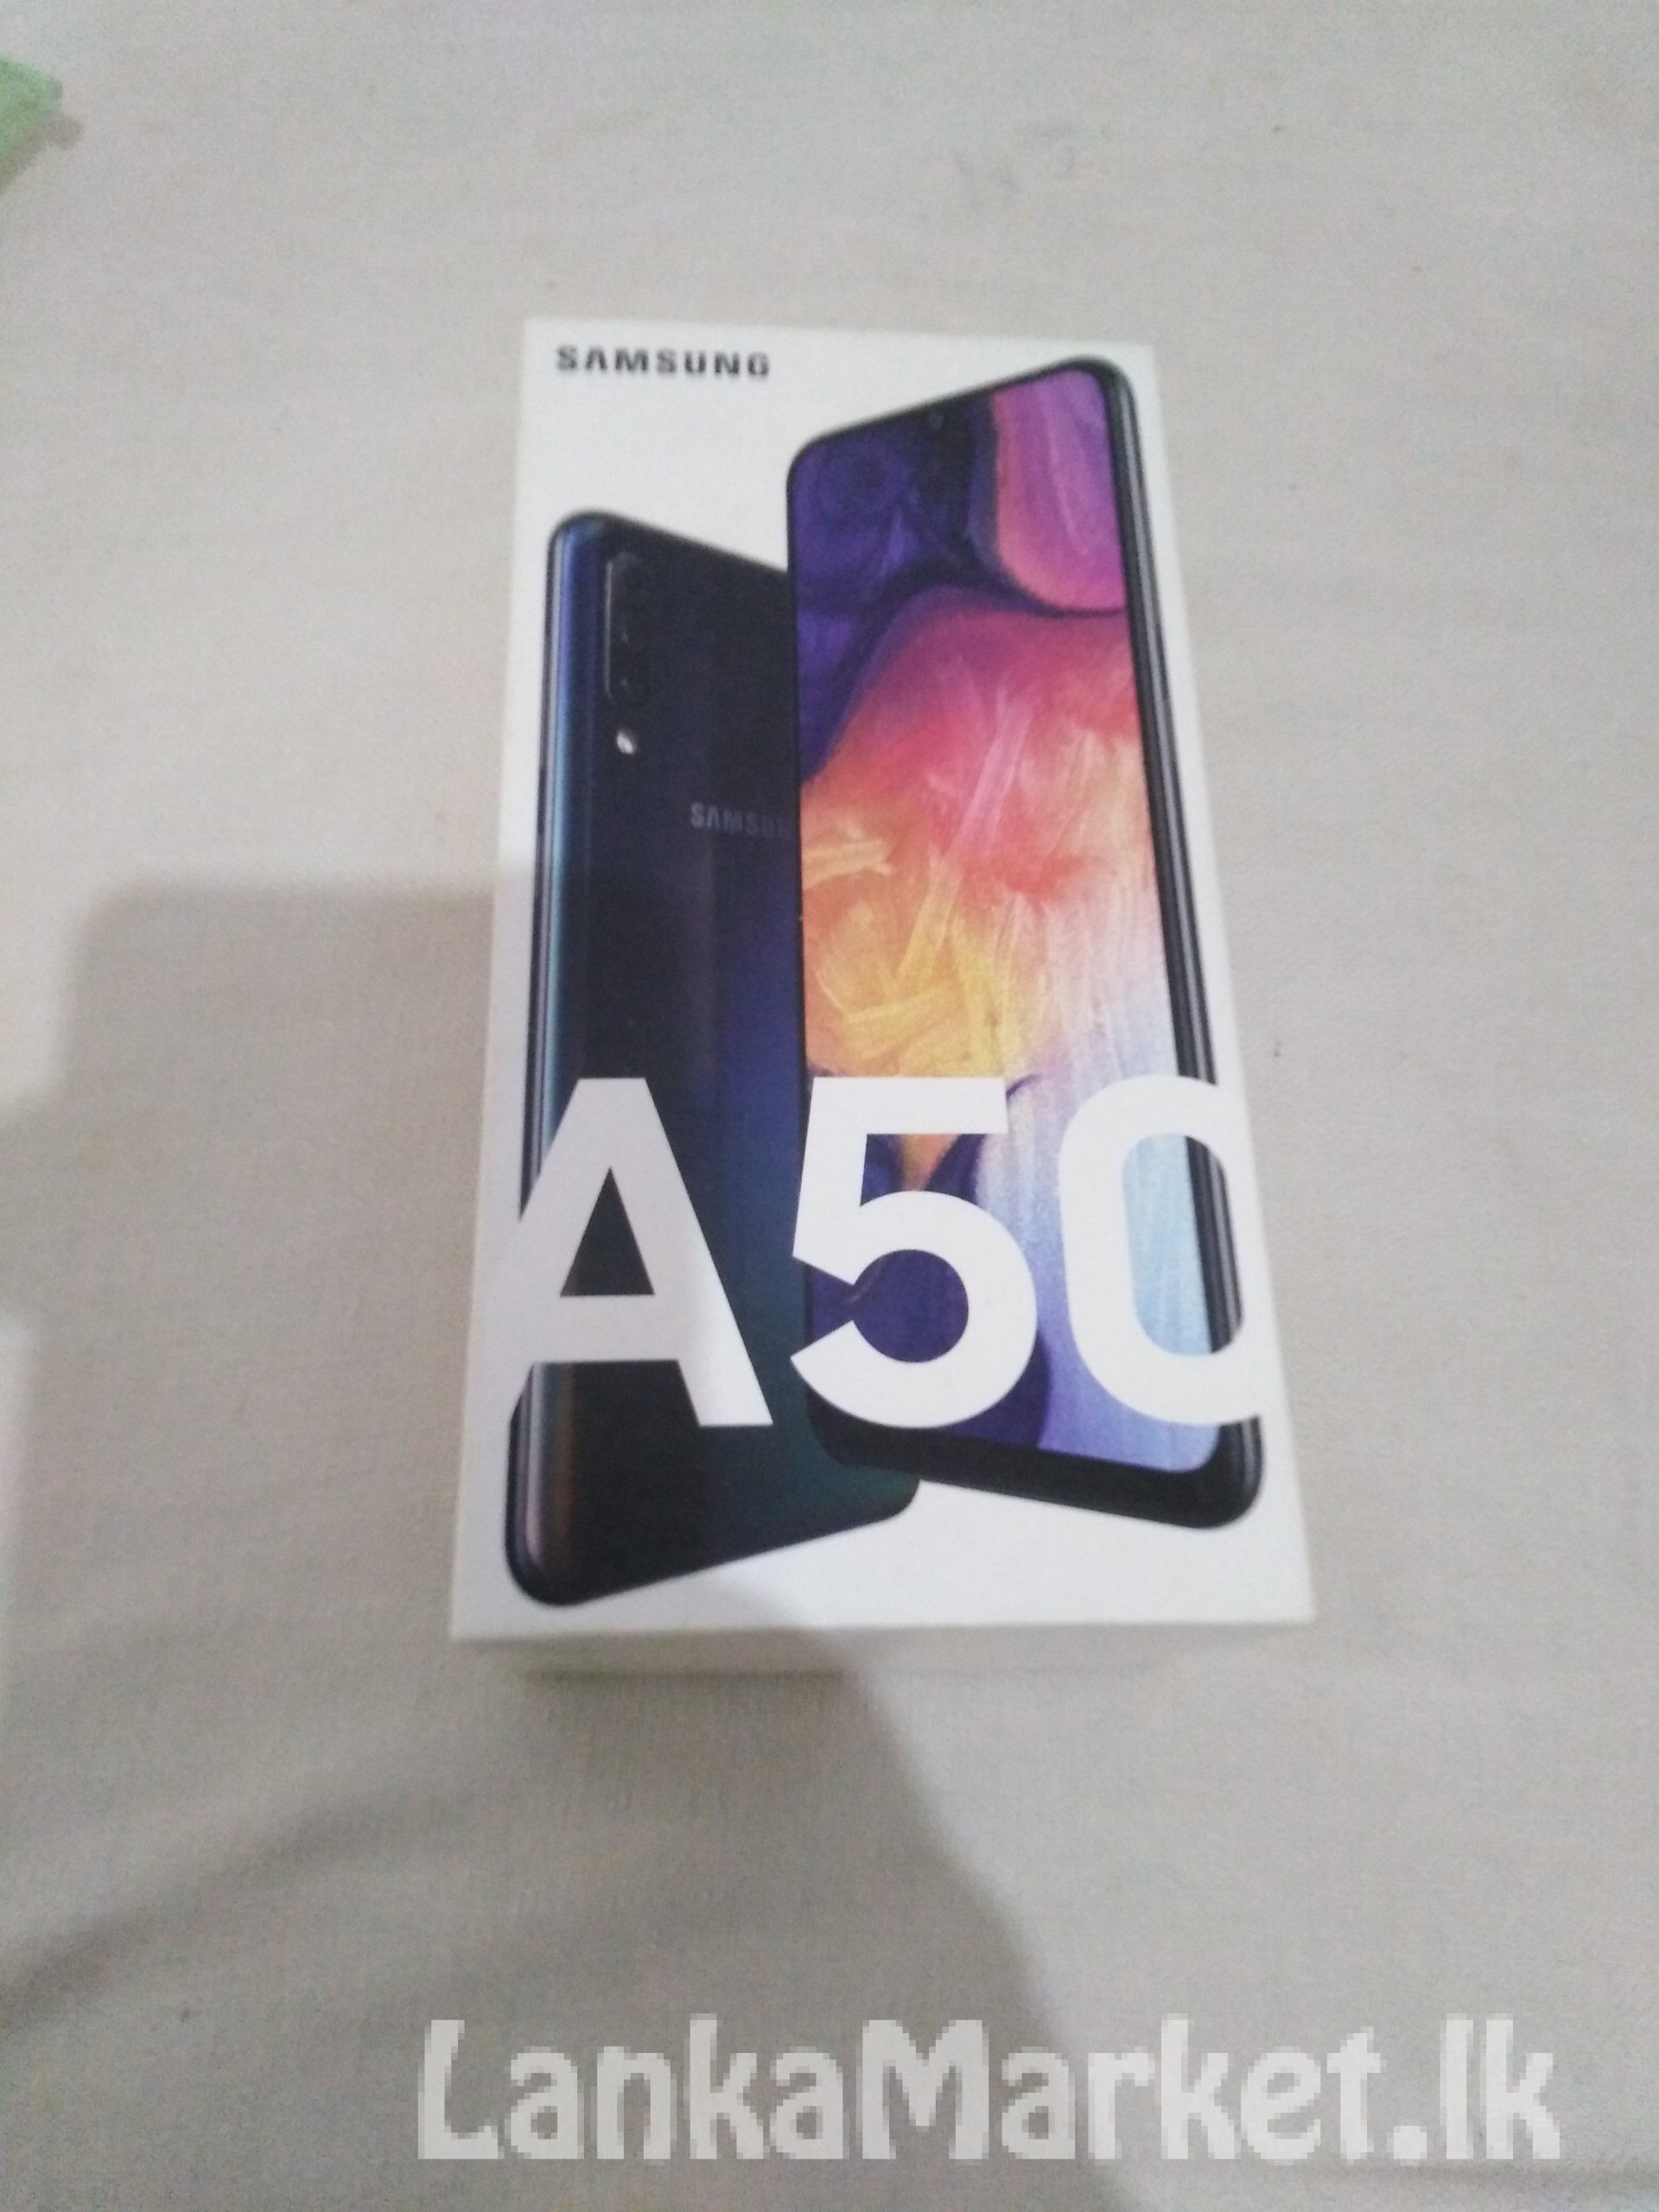 Samsung Galaxy A50 Used For Sale